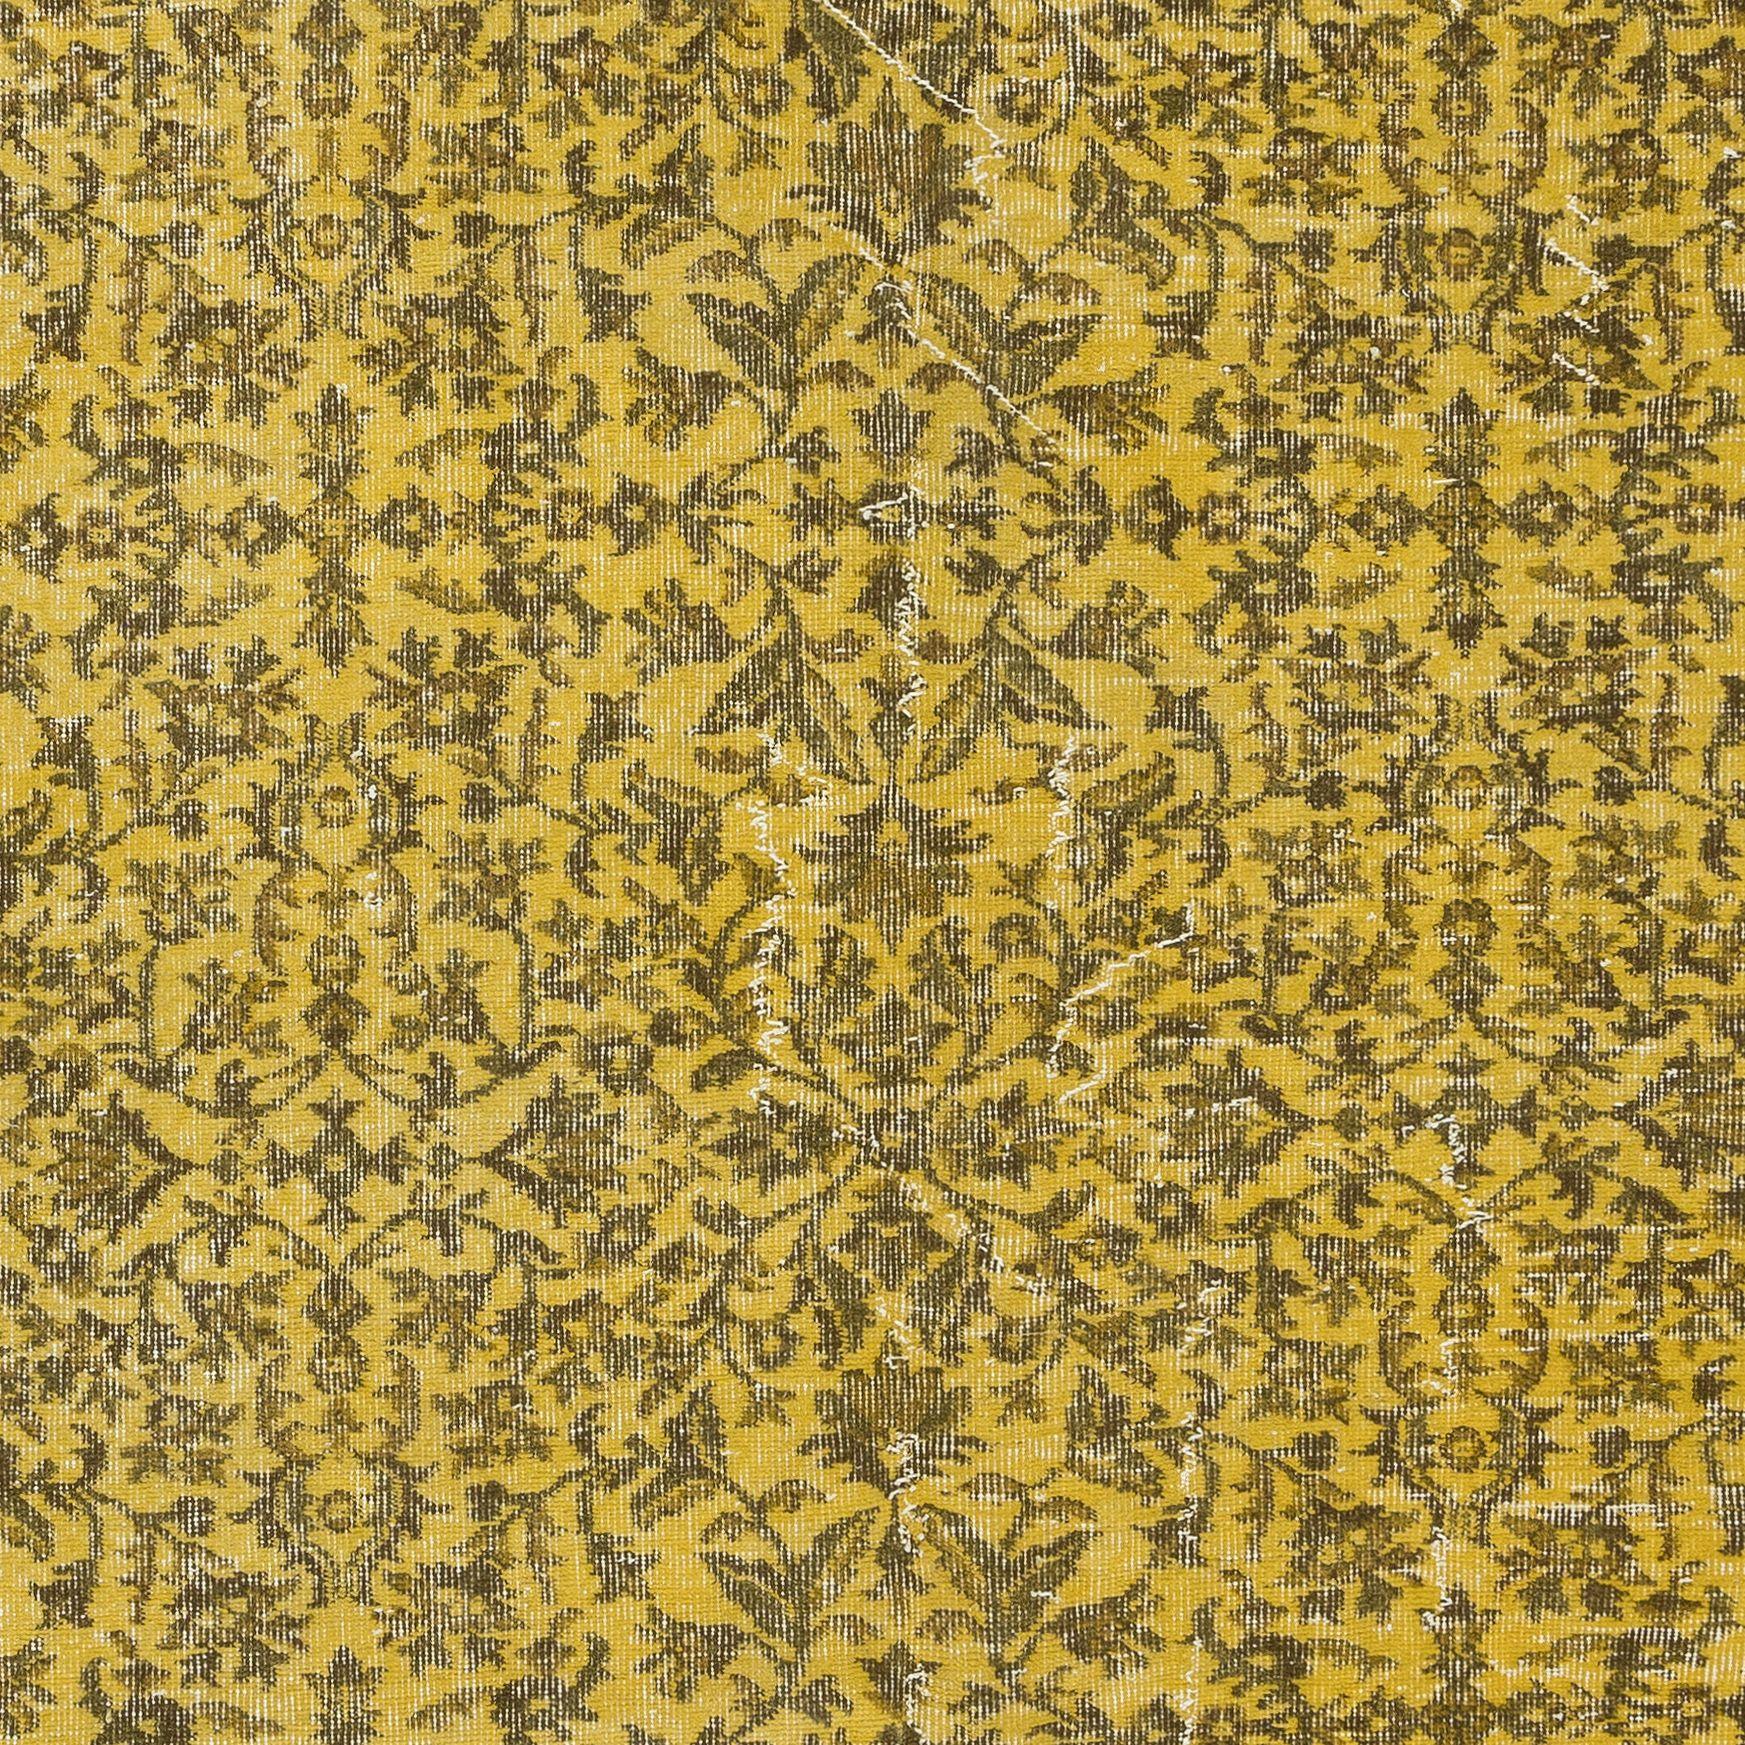 Hand-Woven 6x9 Ft Modern Handmade Turkish Area Rug with Brown Florals & Yellow Background For Sale